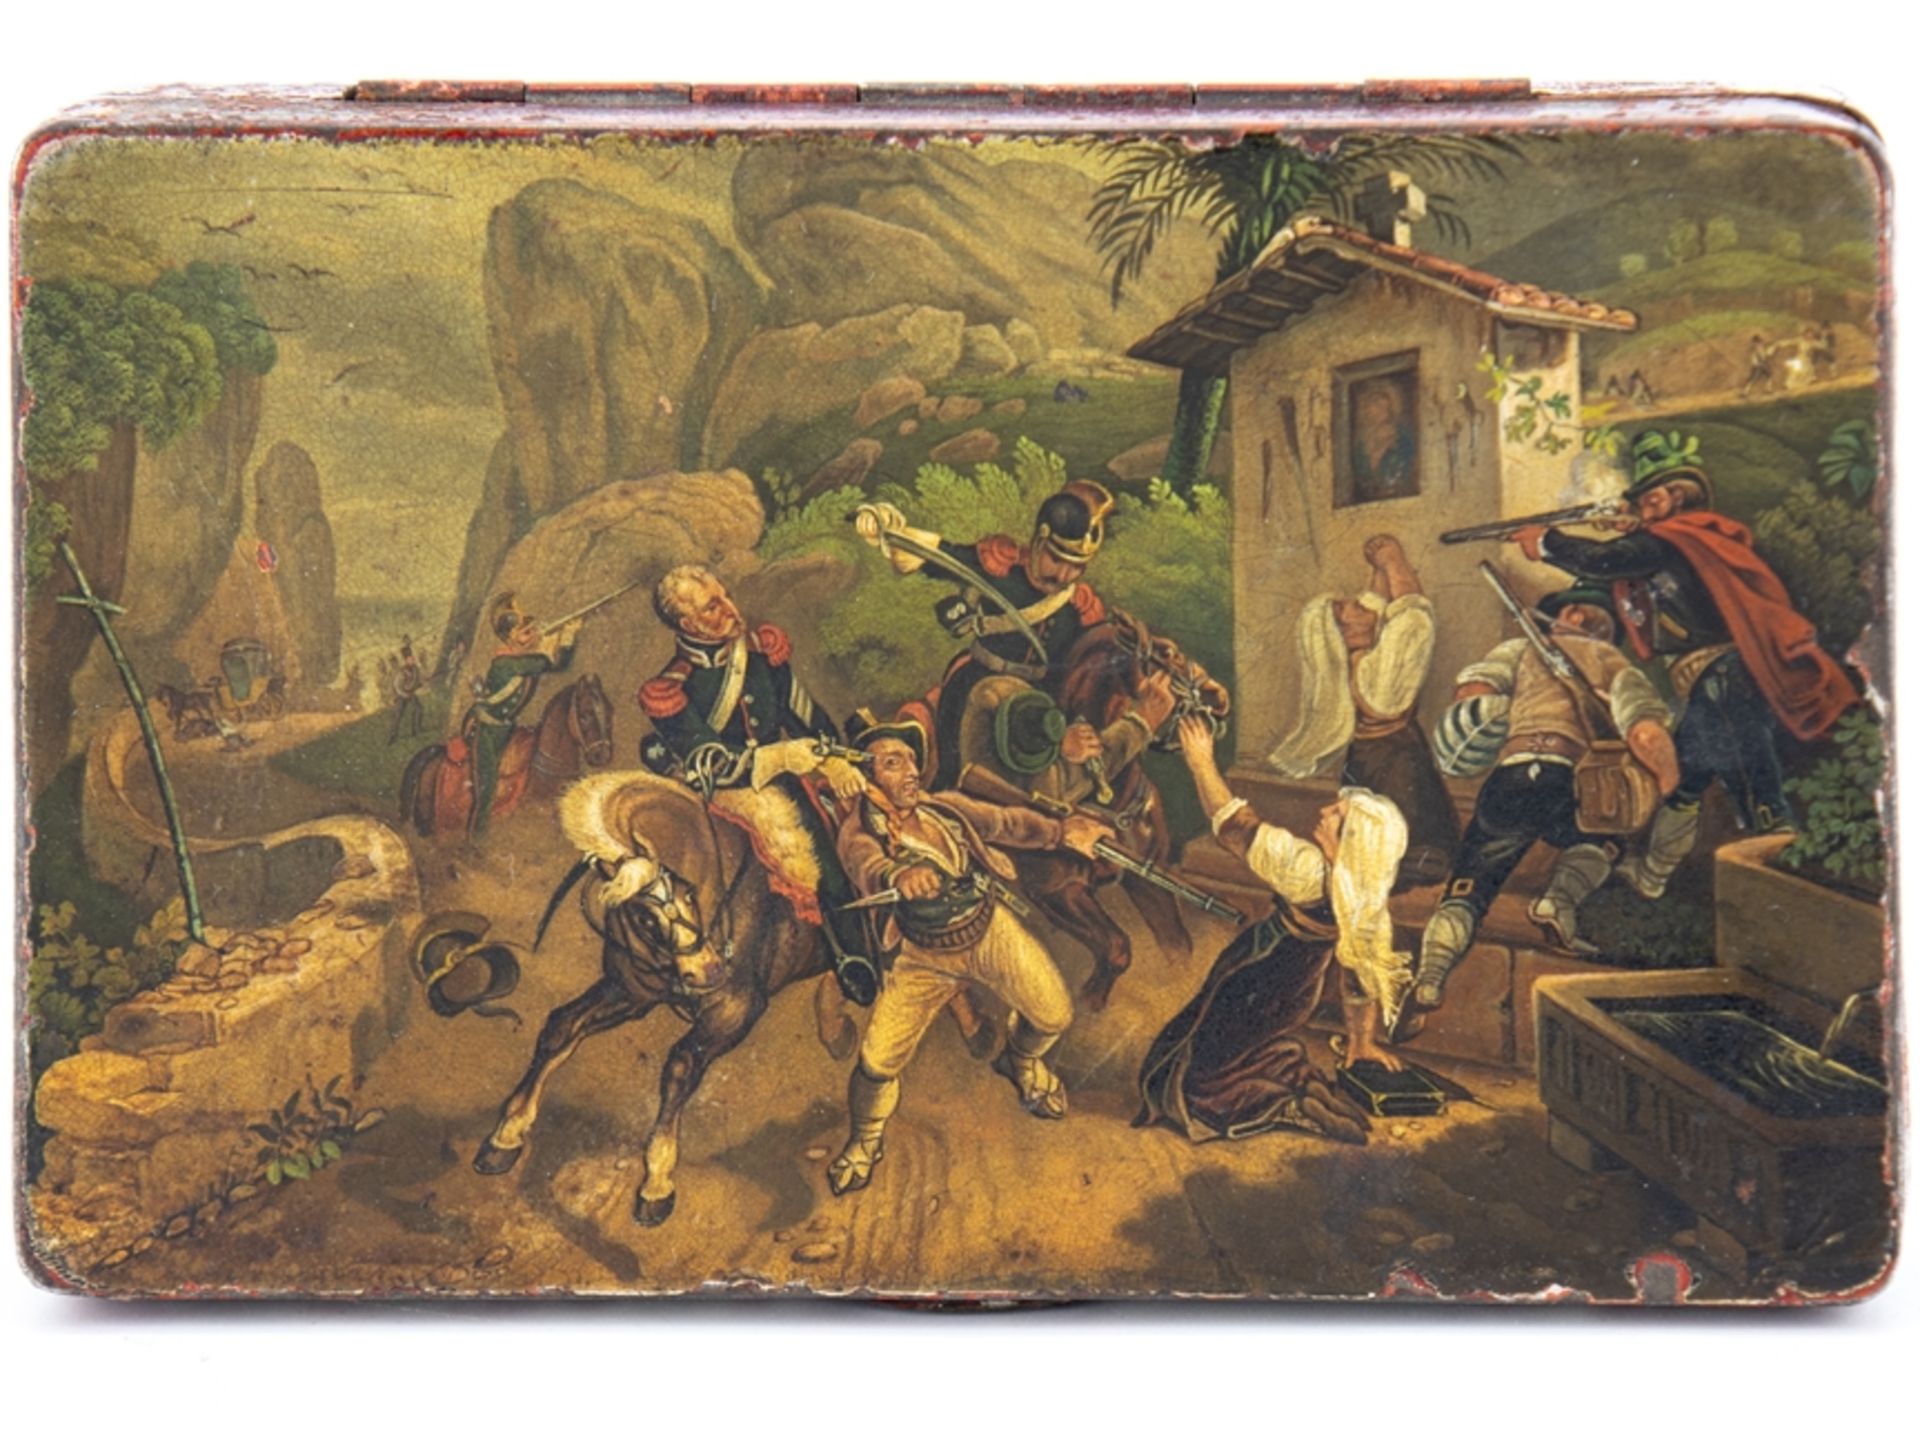 Hand-painted cigar box, tabatiere, robbery scene probably Italy, end of 19th century. - Image 5 of 5